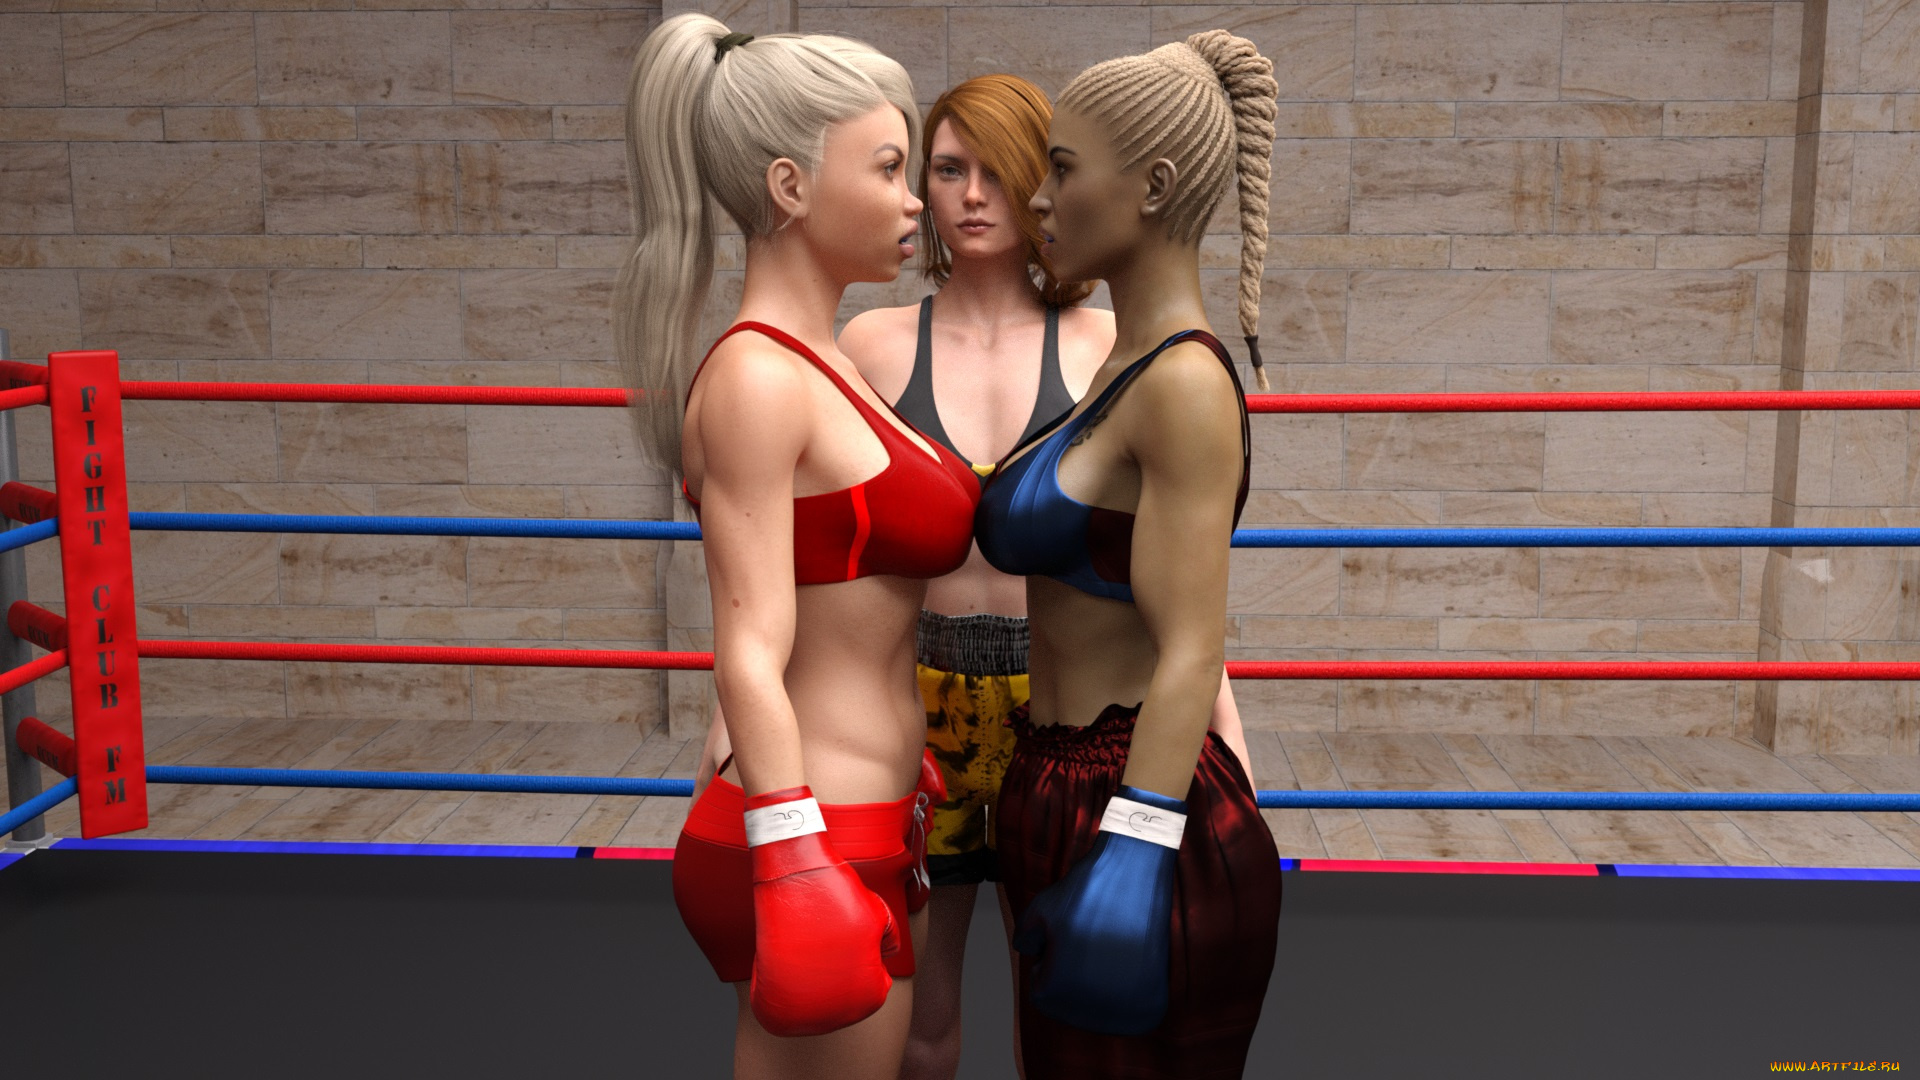 Them hard girl first boxing free porn images